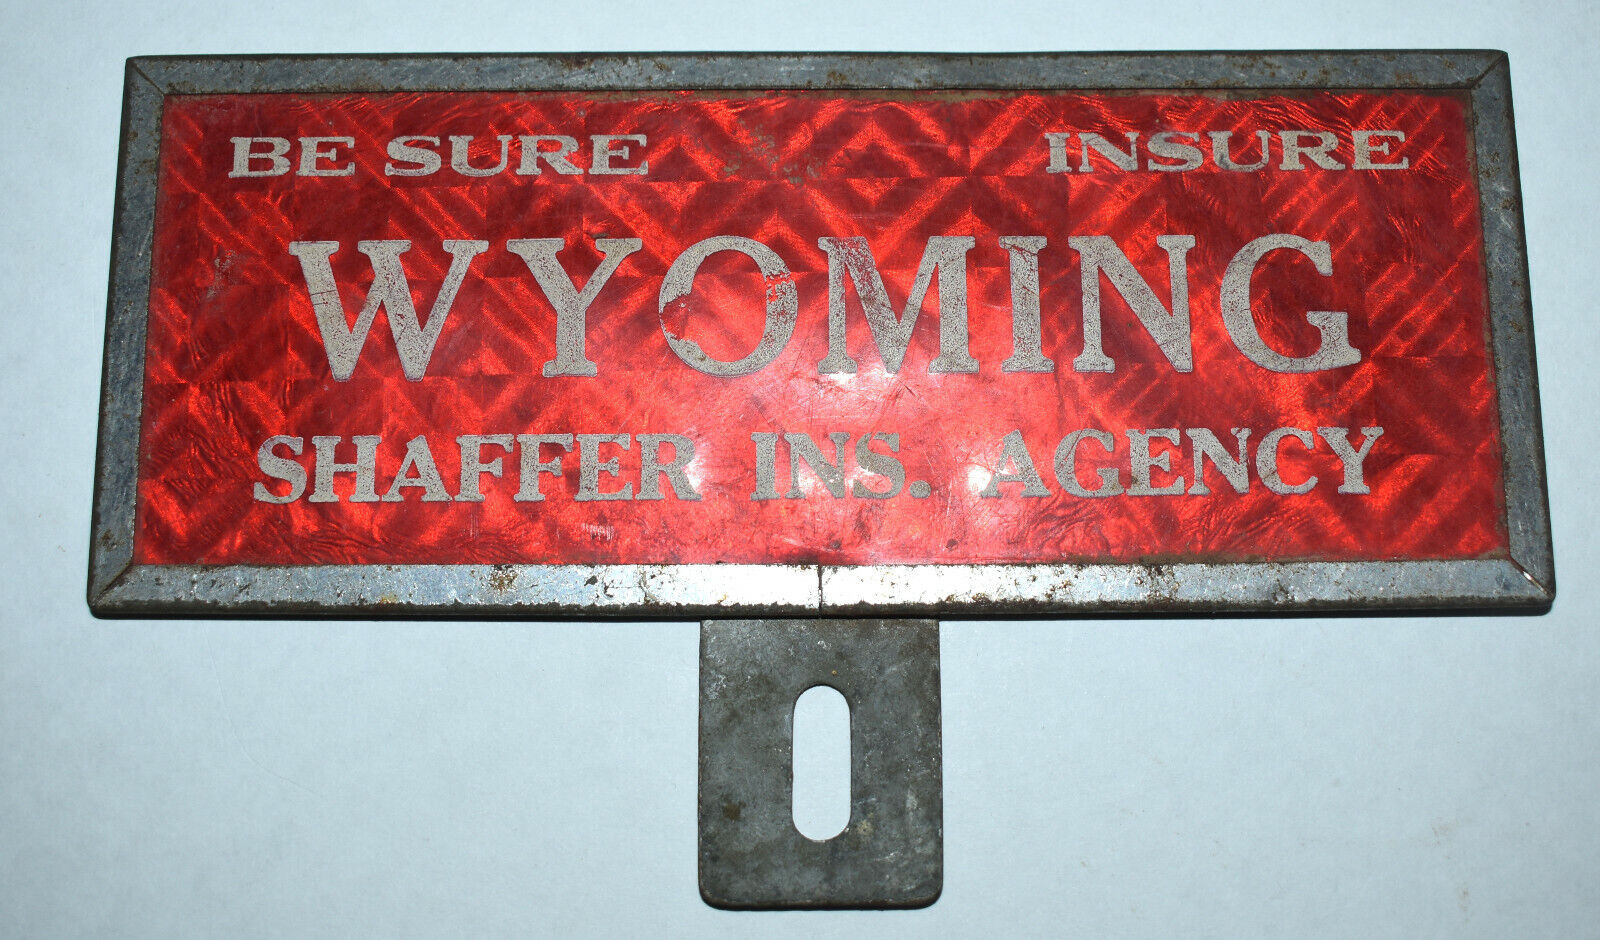 Vintage License Plate Topper Shaffer Insurance Company WYOMING IOWA Advertising